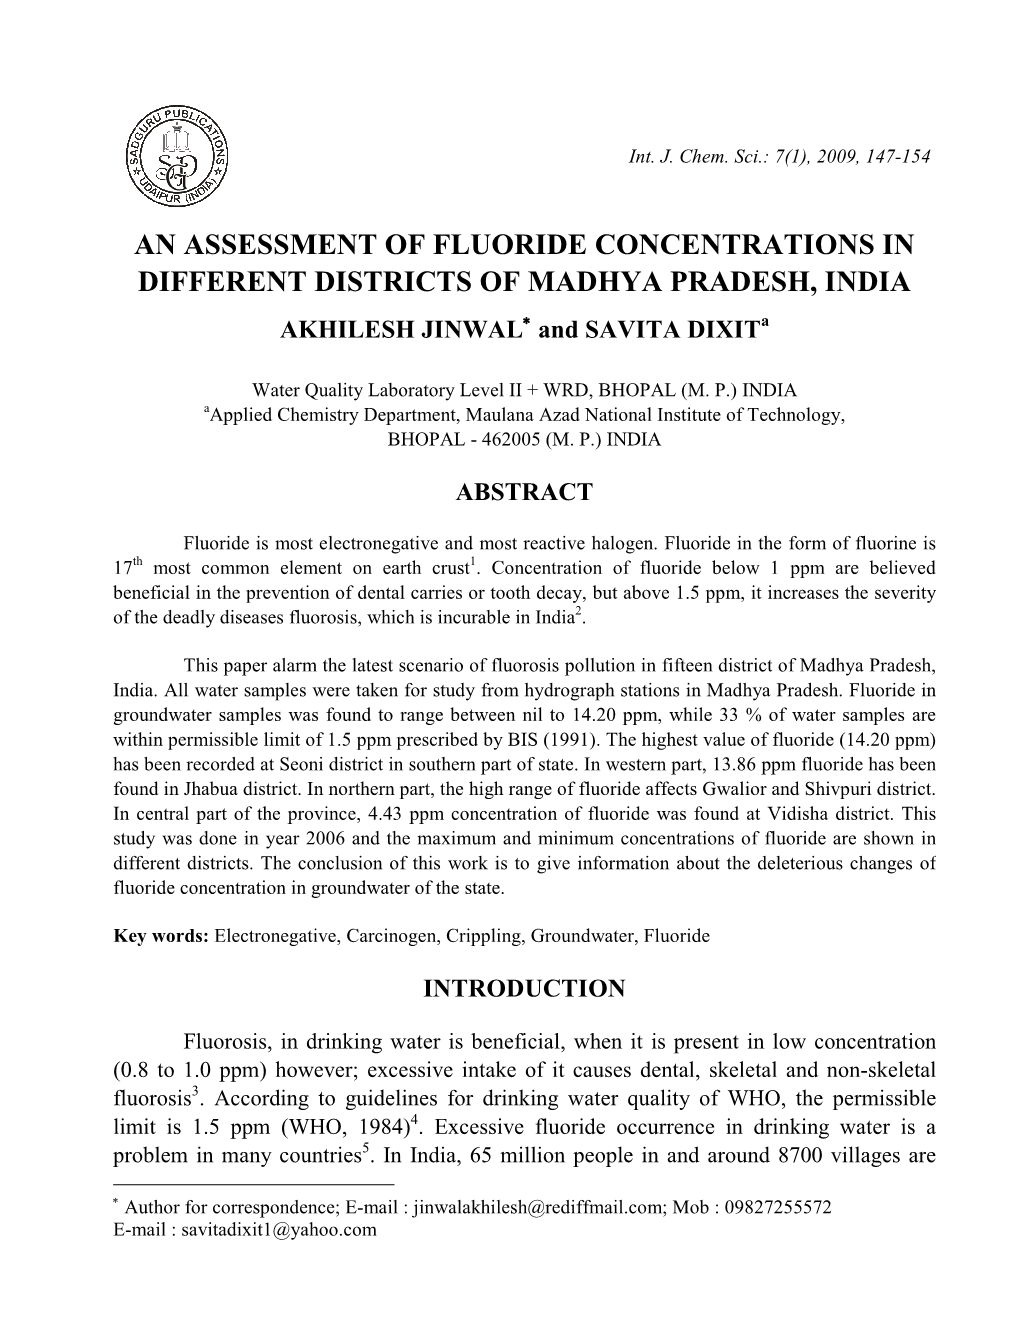 AN ASSESSMENT of FLUORIDE CONCENTRATIONS in DIFFERENT DISTRICTS of MADHYA PRADESH, INDIA AKHILESH JINWAL ∗∗∗ and SAVITA DIXIT A